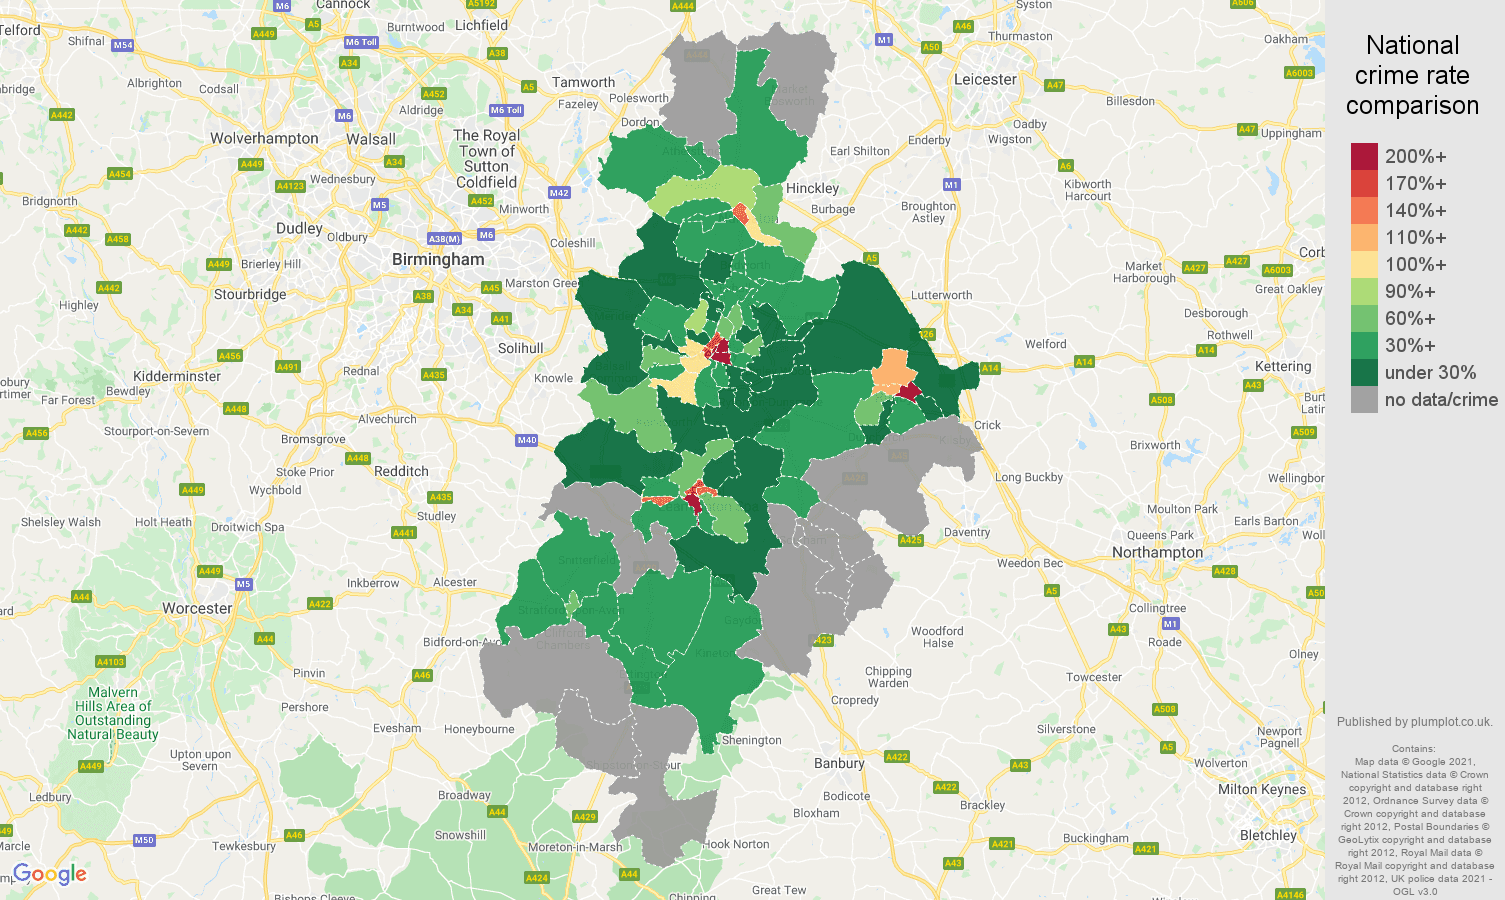 Coventry bicycle theft crime rate comparison map